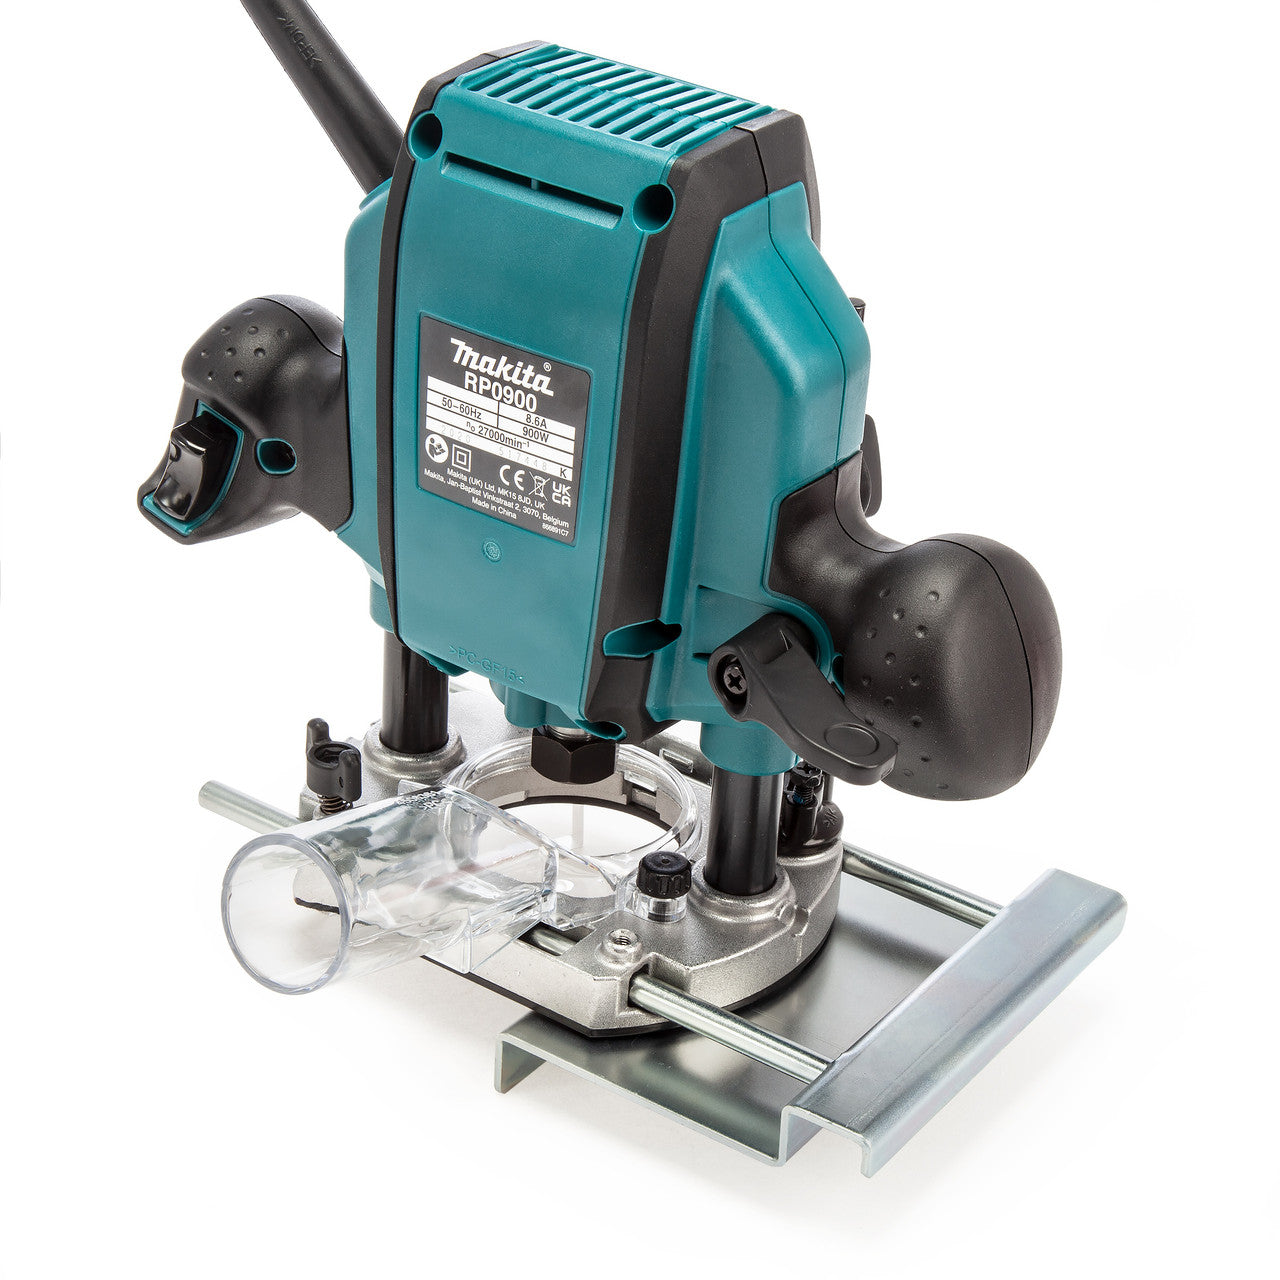 Makita RP0900X 1/4" or 3/8" Plunge Router (240V)